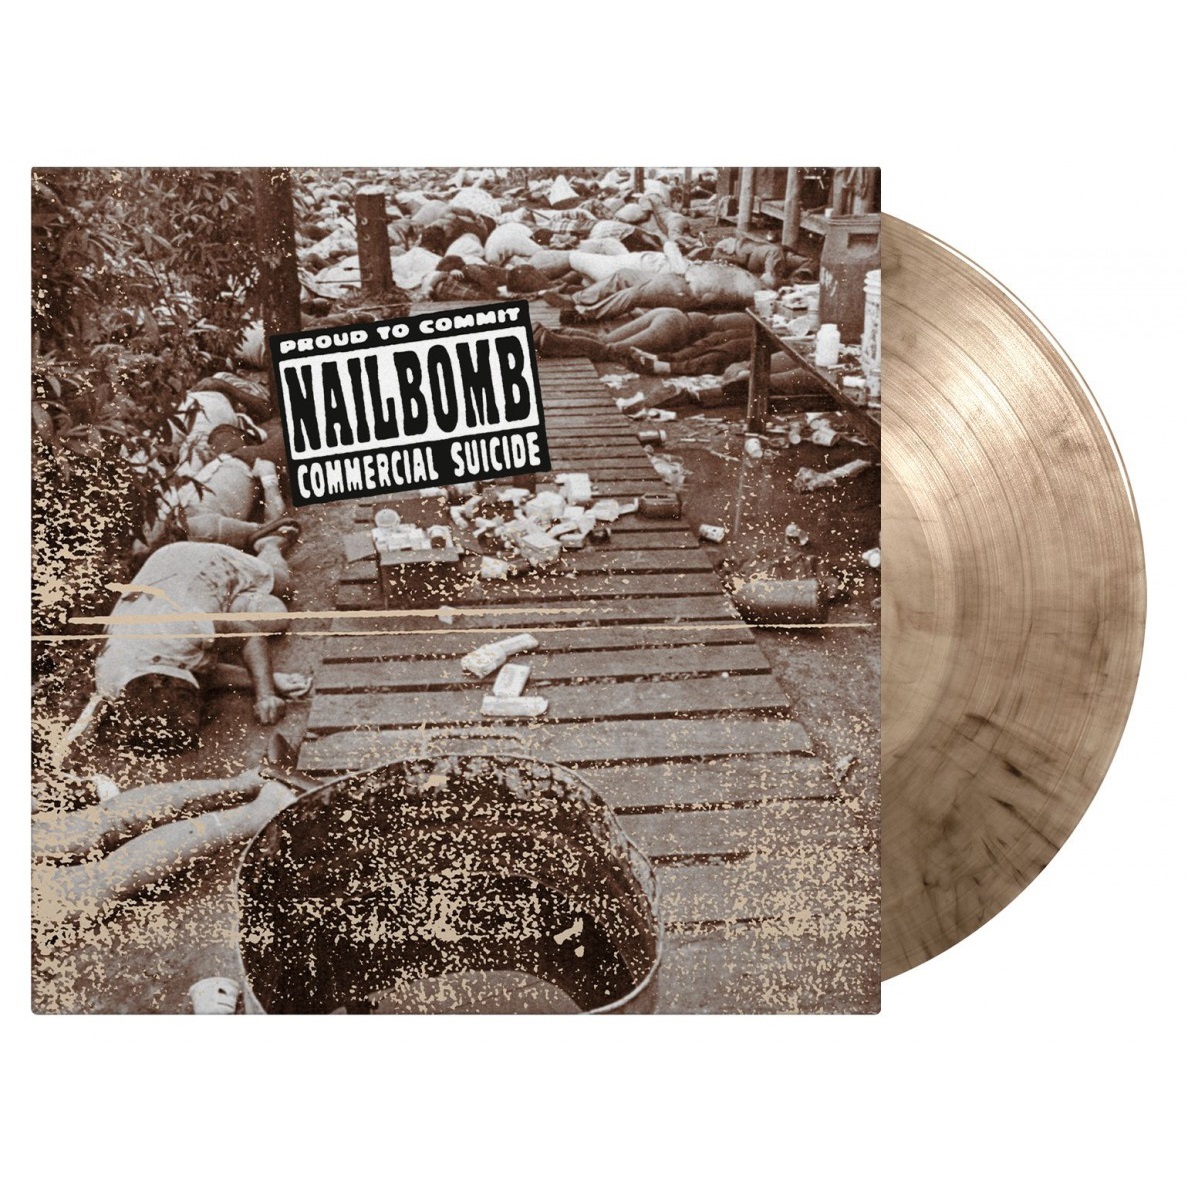 Nailbomb (네일밤) - Proud To Commit Commercial Suicide [스모크 컬러 LP] 